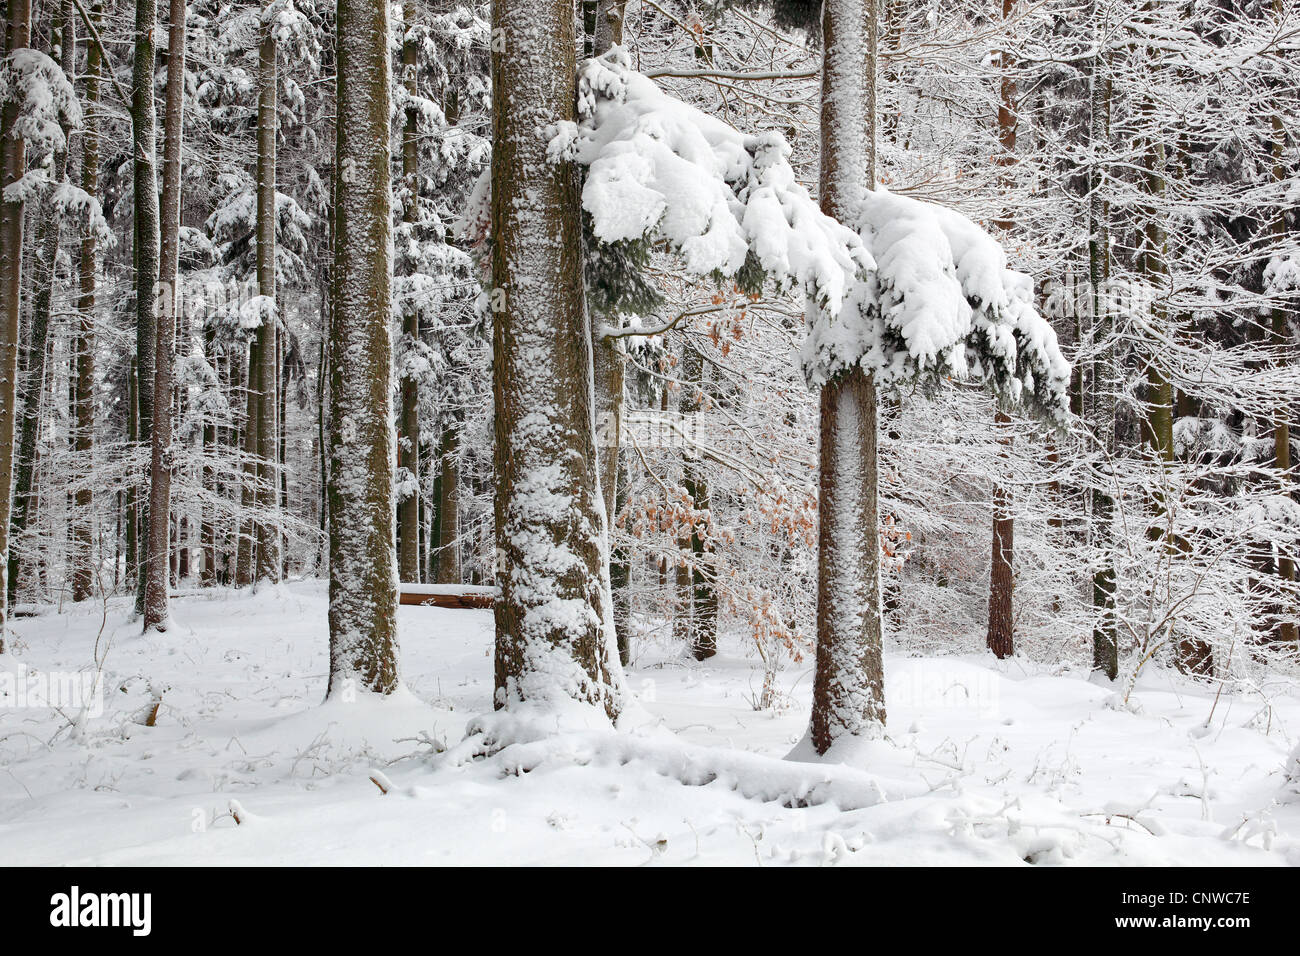 Norway spruce (Picea abies), snow-covered forest, Switzerland, Zuercher Oberland Stock Photo